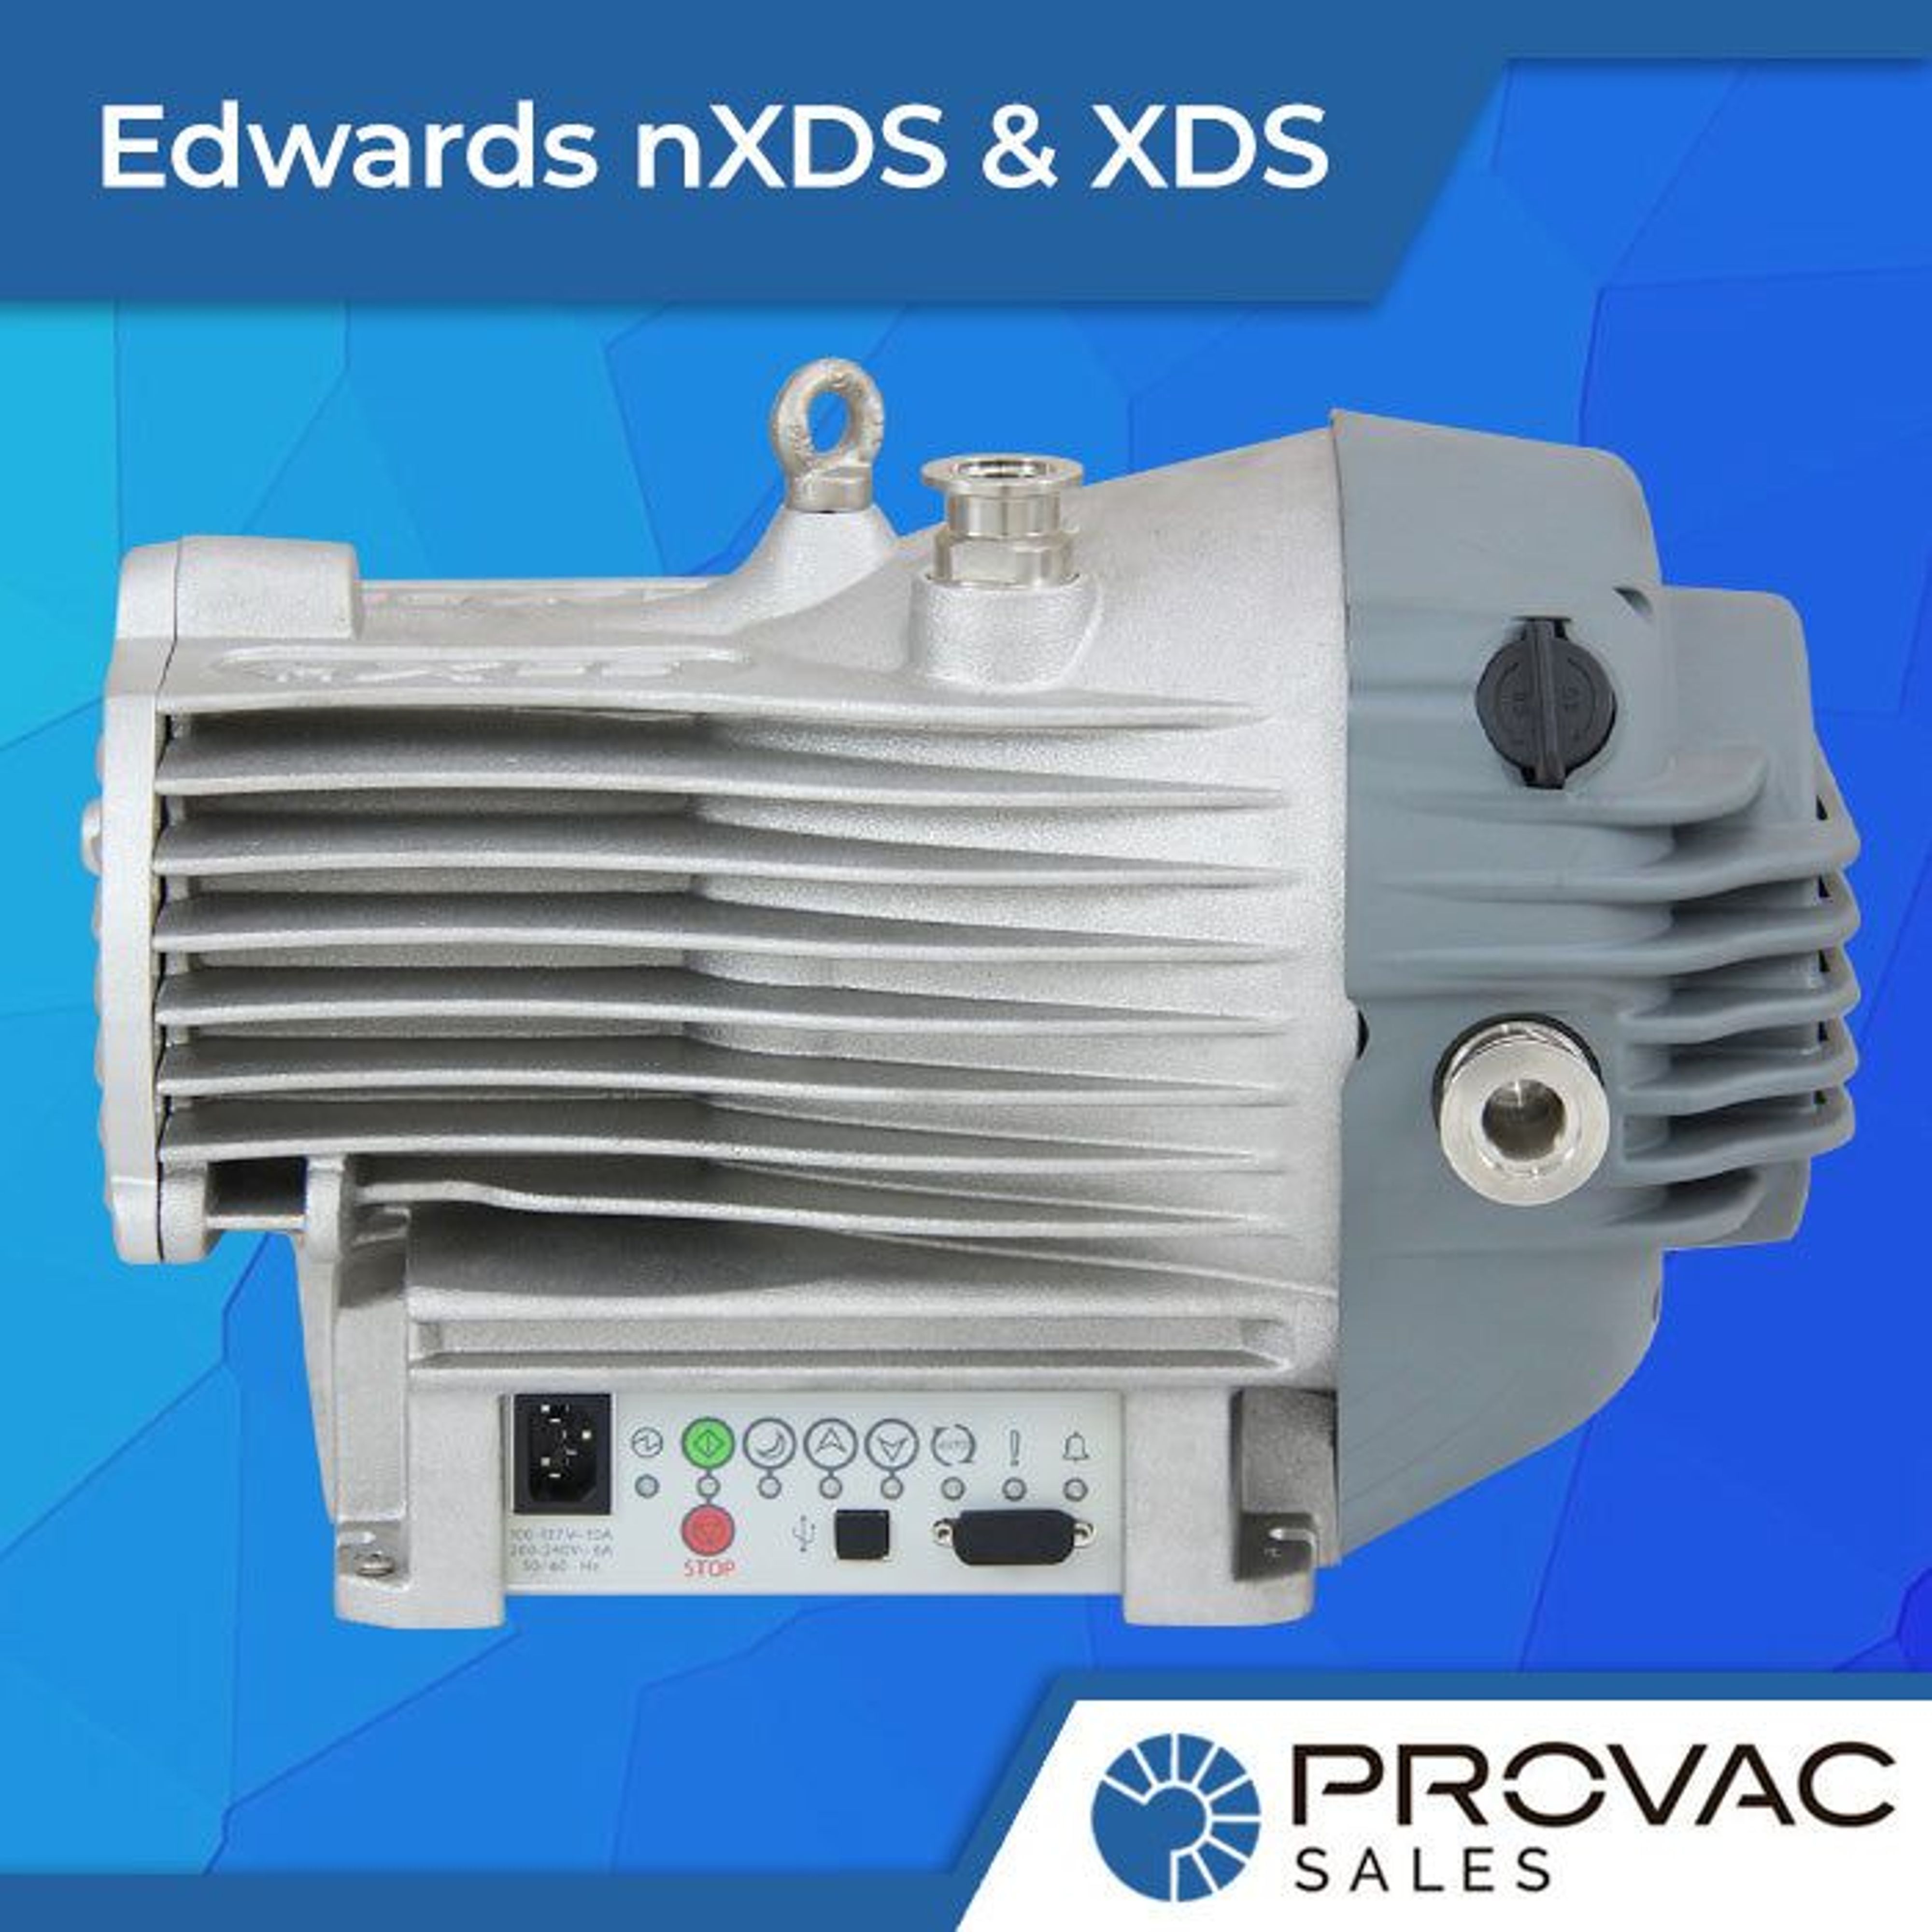 Edwards nXDS & XDS Dry Scroll Pumps Background